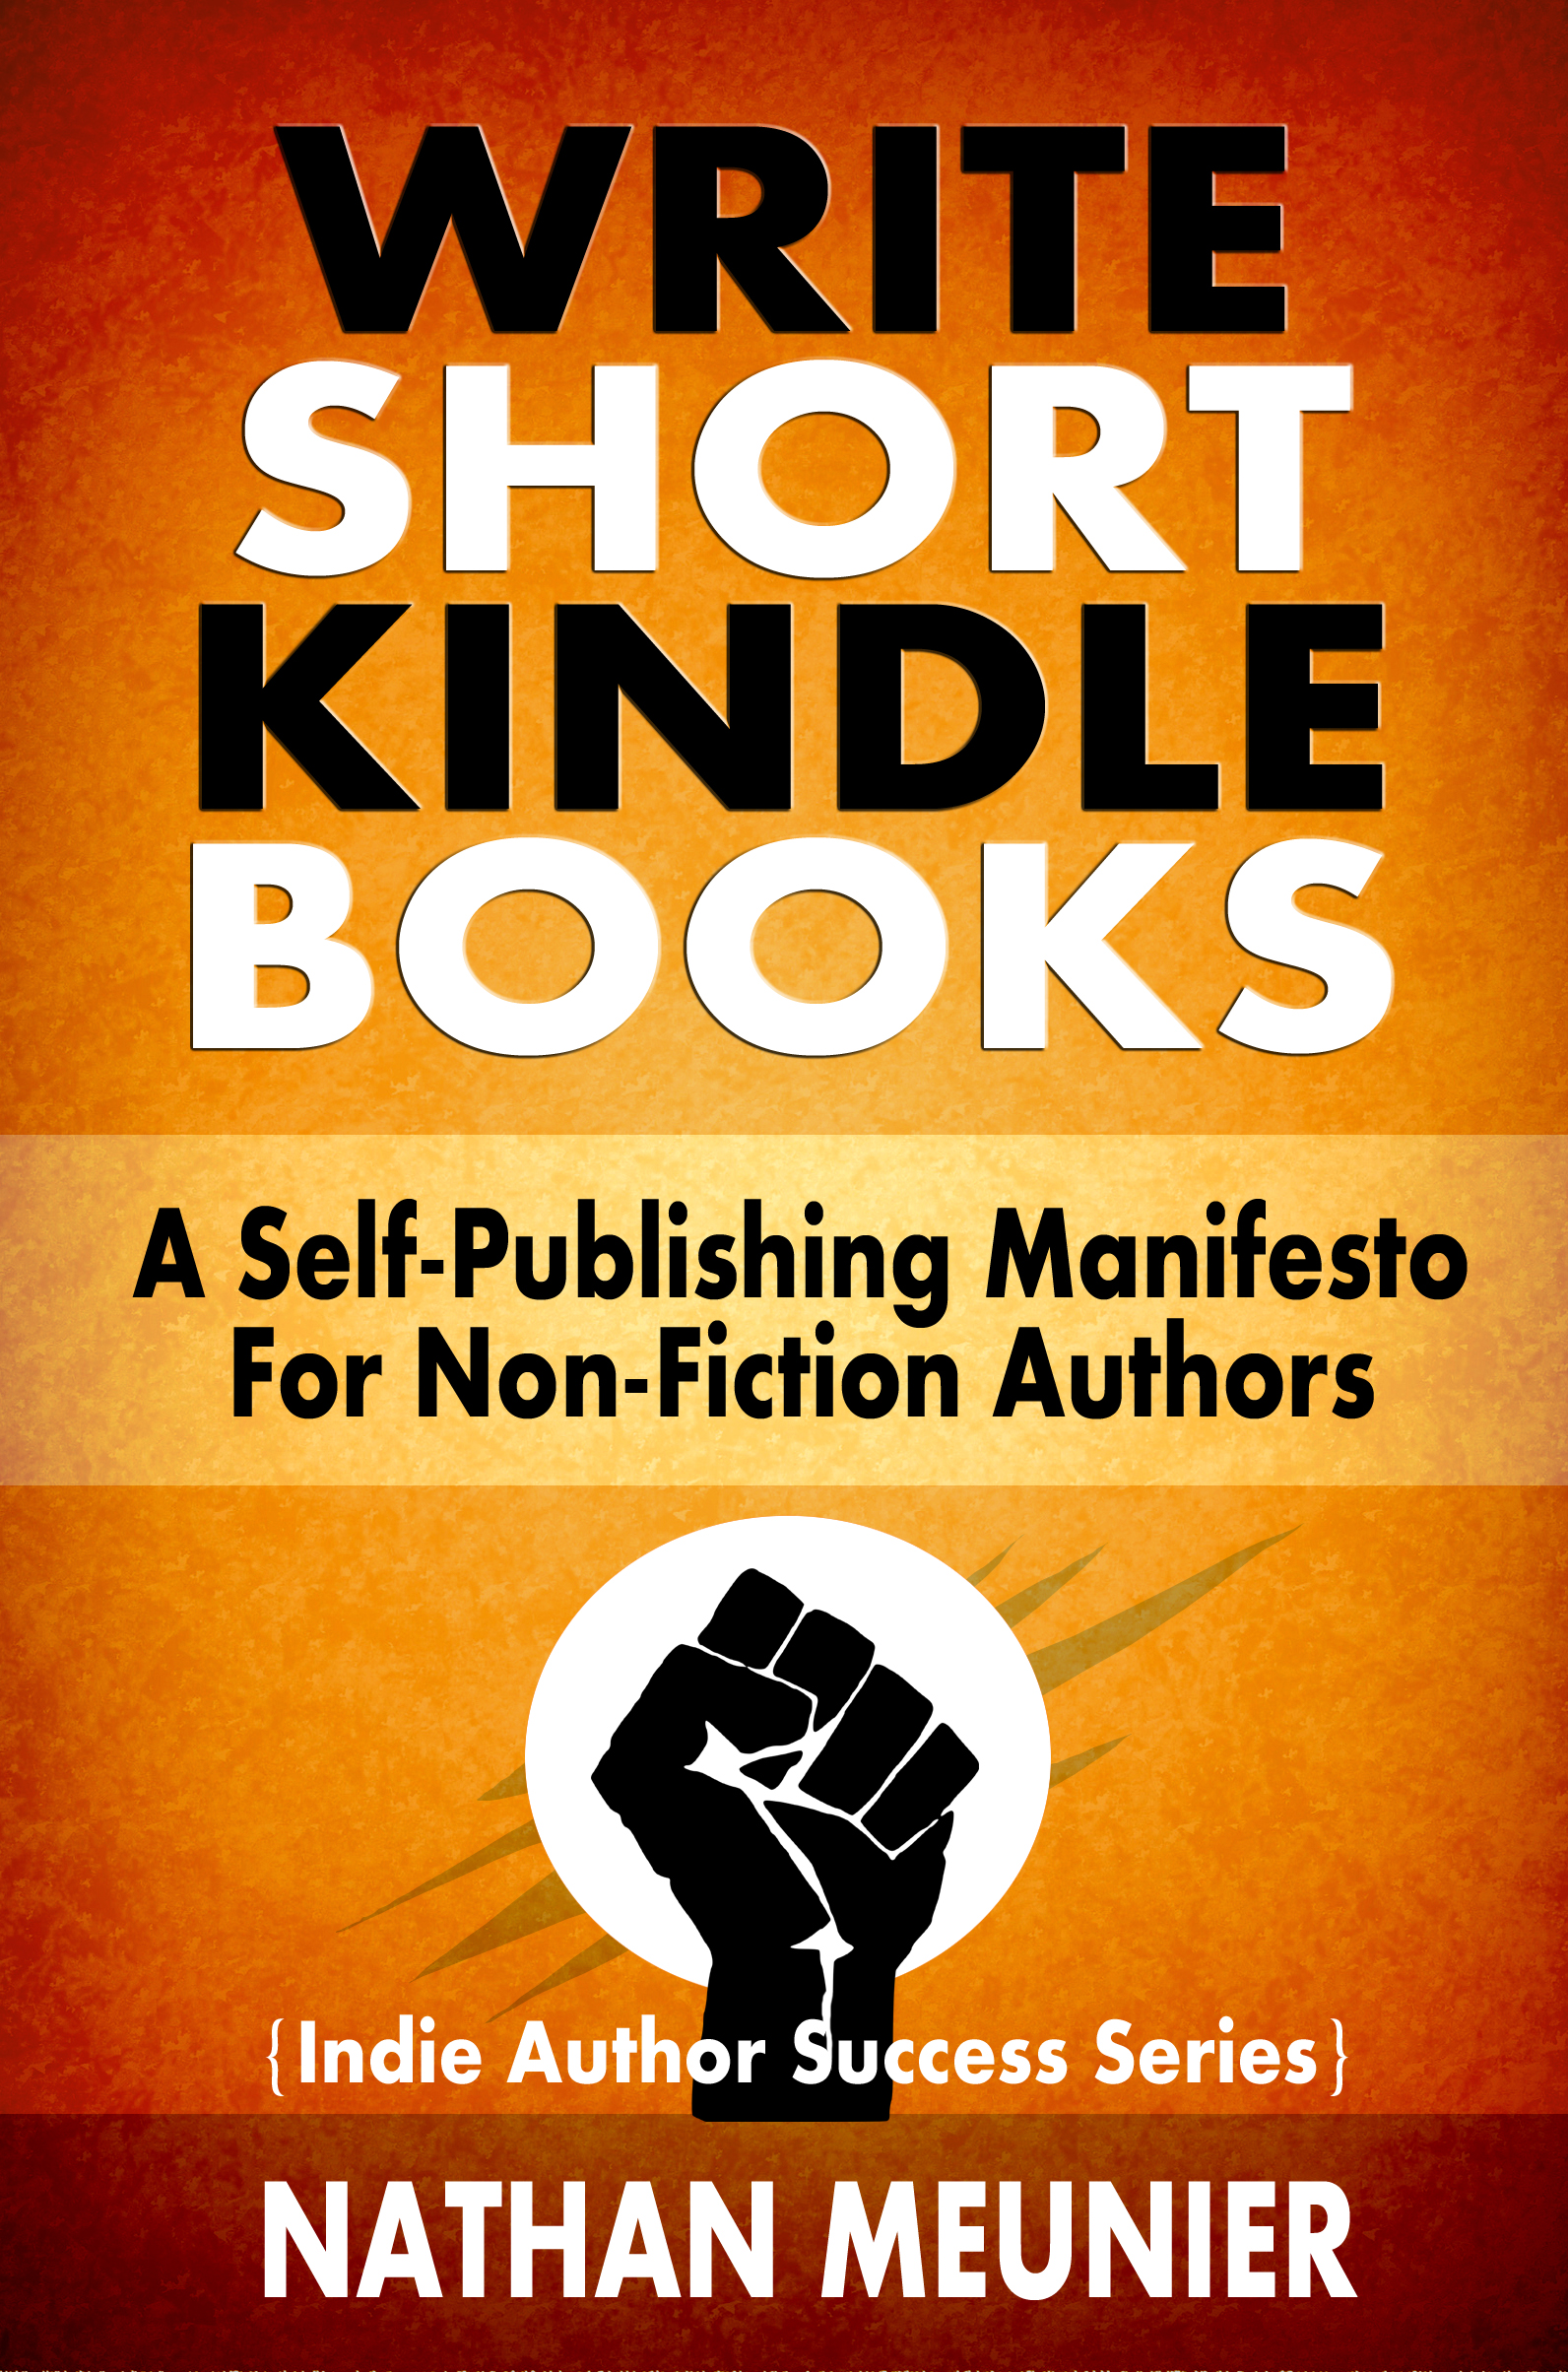 The Real Benefits of Writing Short Kindle Books [Sample Chapter